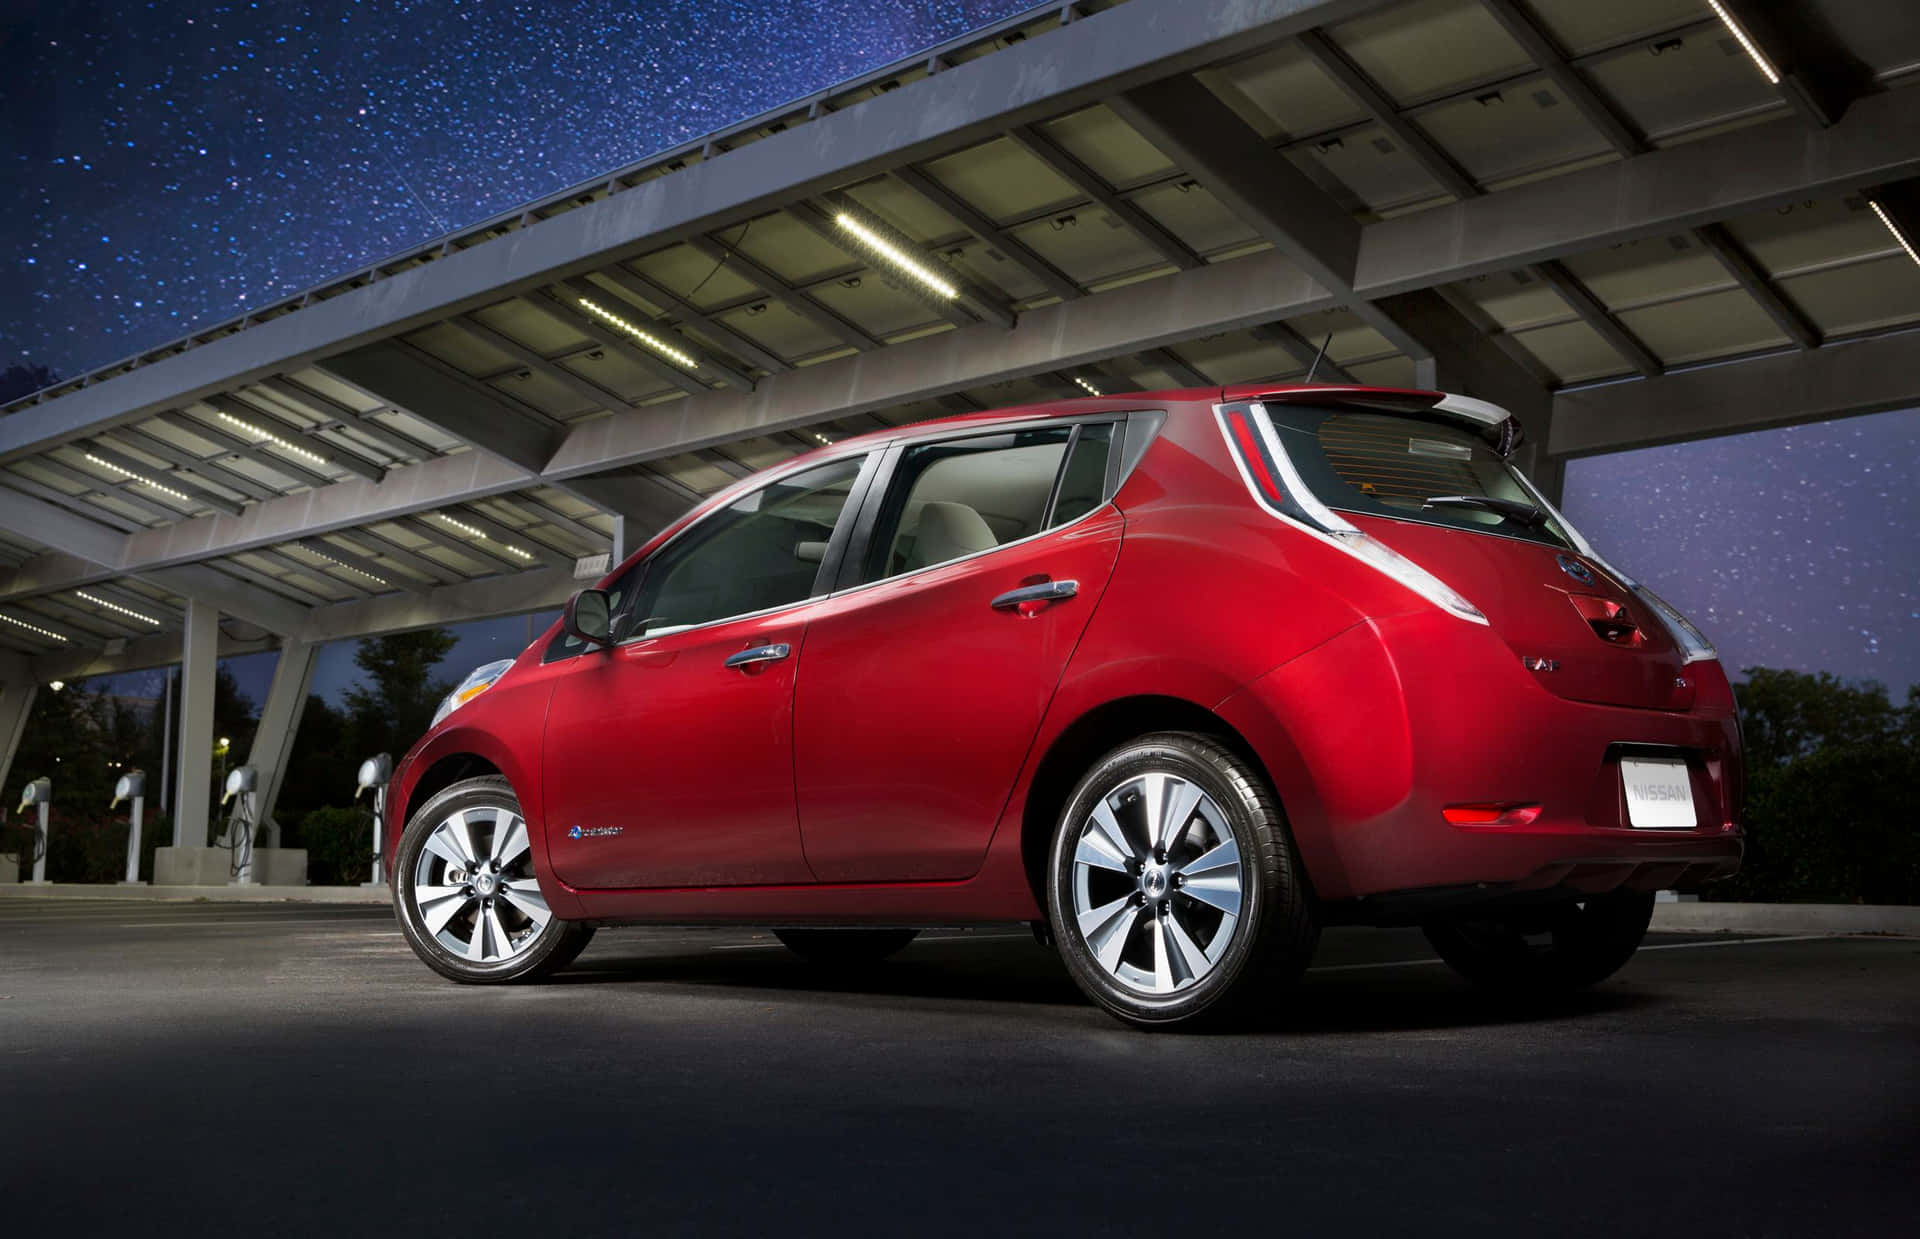 A Pristine Nissan Leaf Electric Vehicle Poised On A Scenic Road. Wallpaper